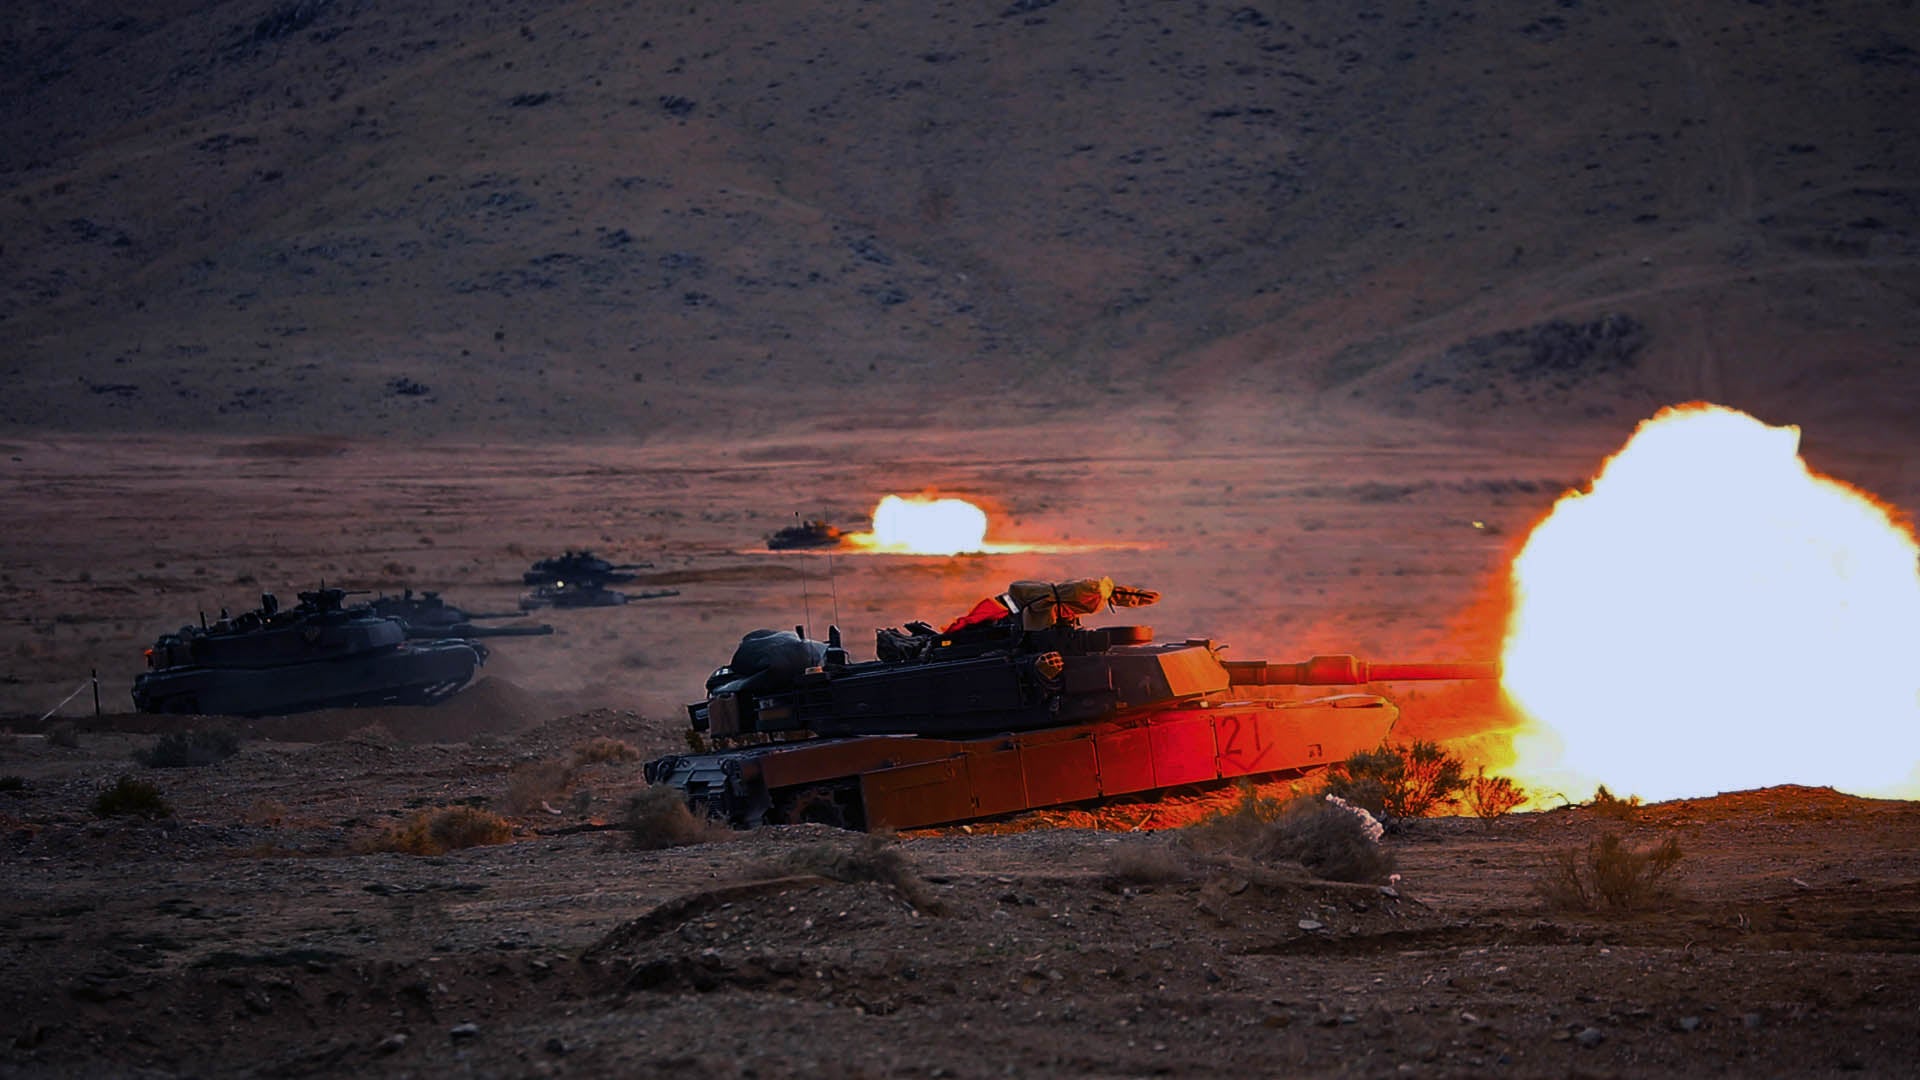 Soldiers with the 2nd Armored Brigade Combat Team, 3rd Infantry Division, fire from a modernized M1A2 SEVv3 Abrams tank during a rotation at the National Training Center, Fort Irwin, California. (Credit: U.S. Army/Sgt. Dre Stout)